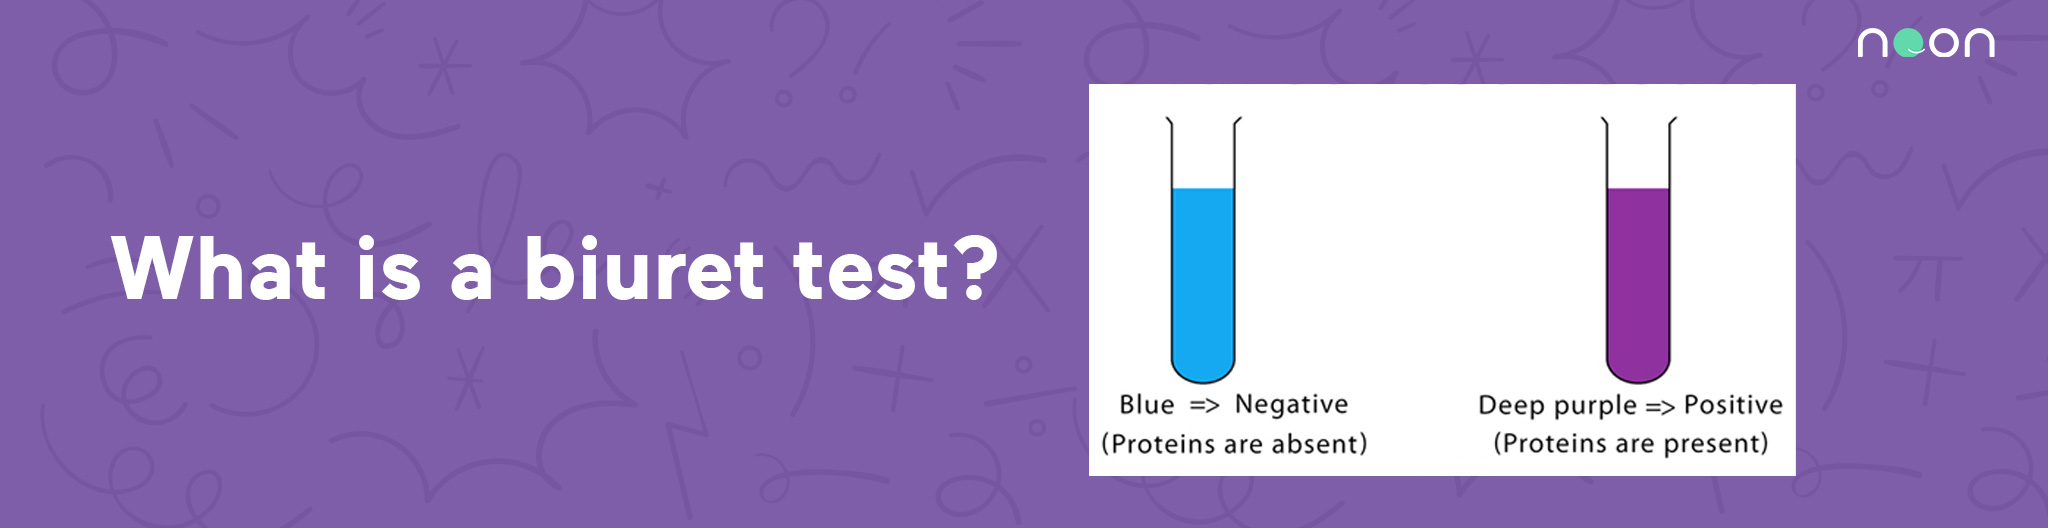 What is a biuret test